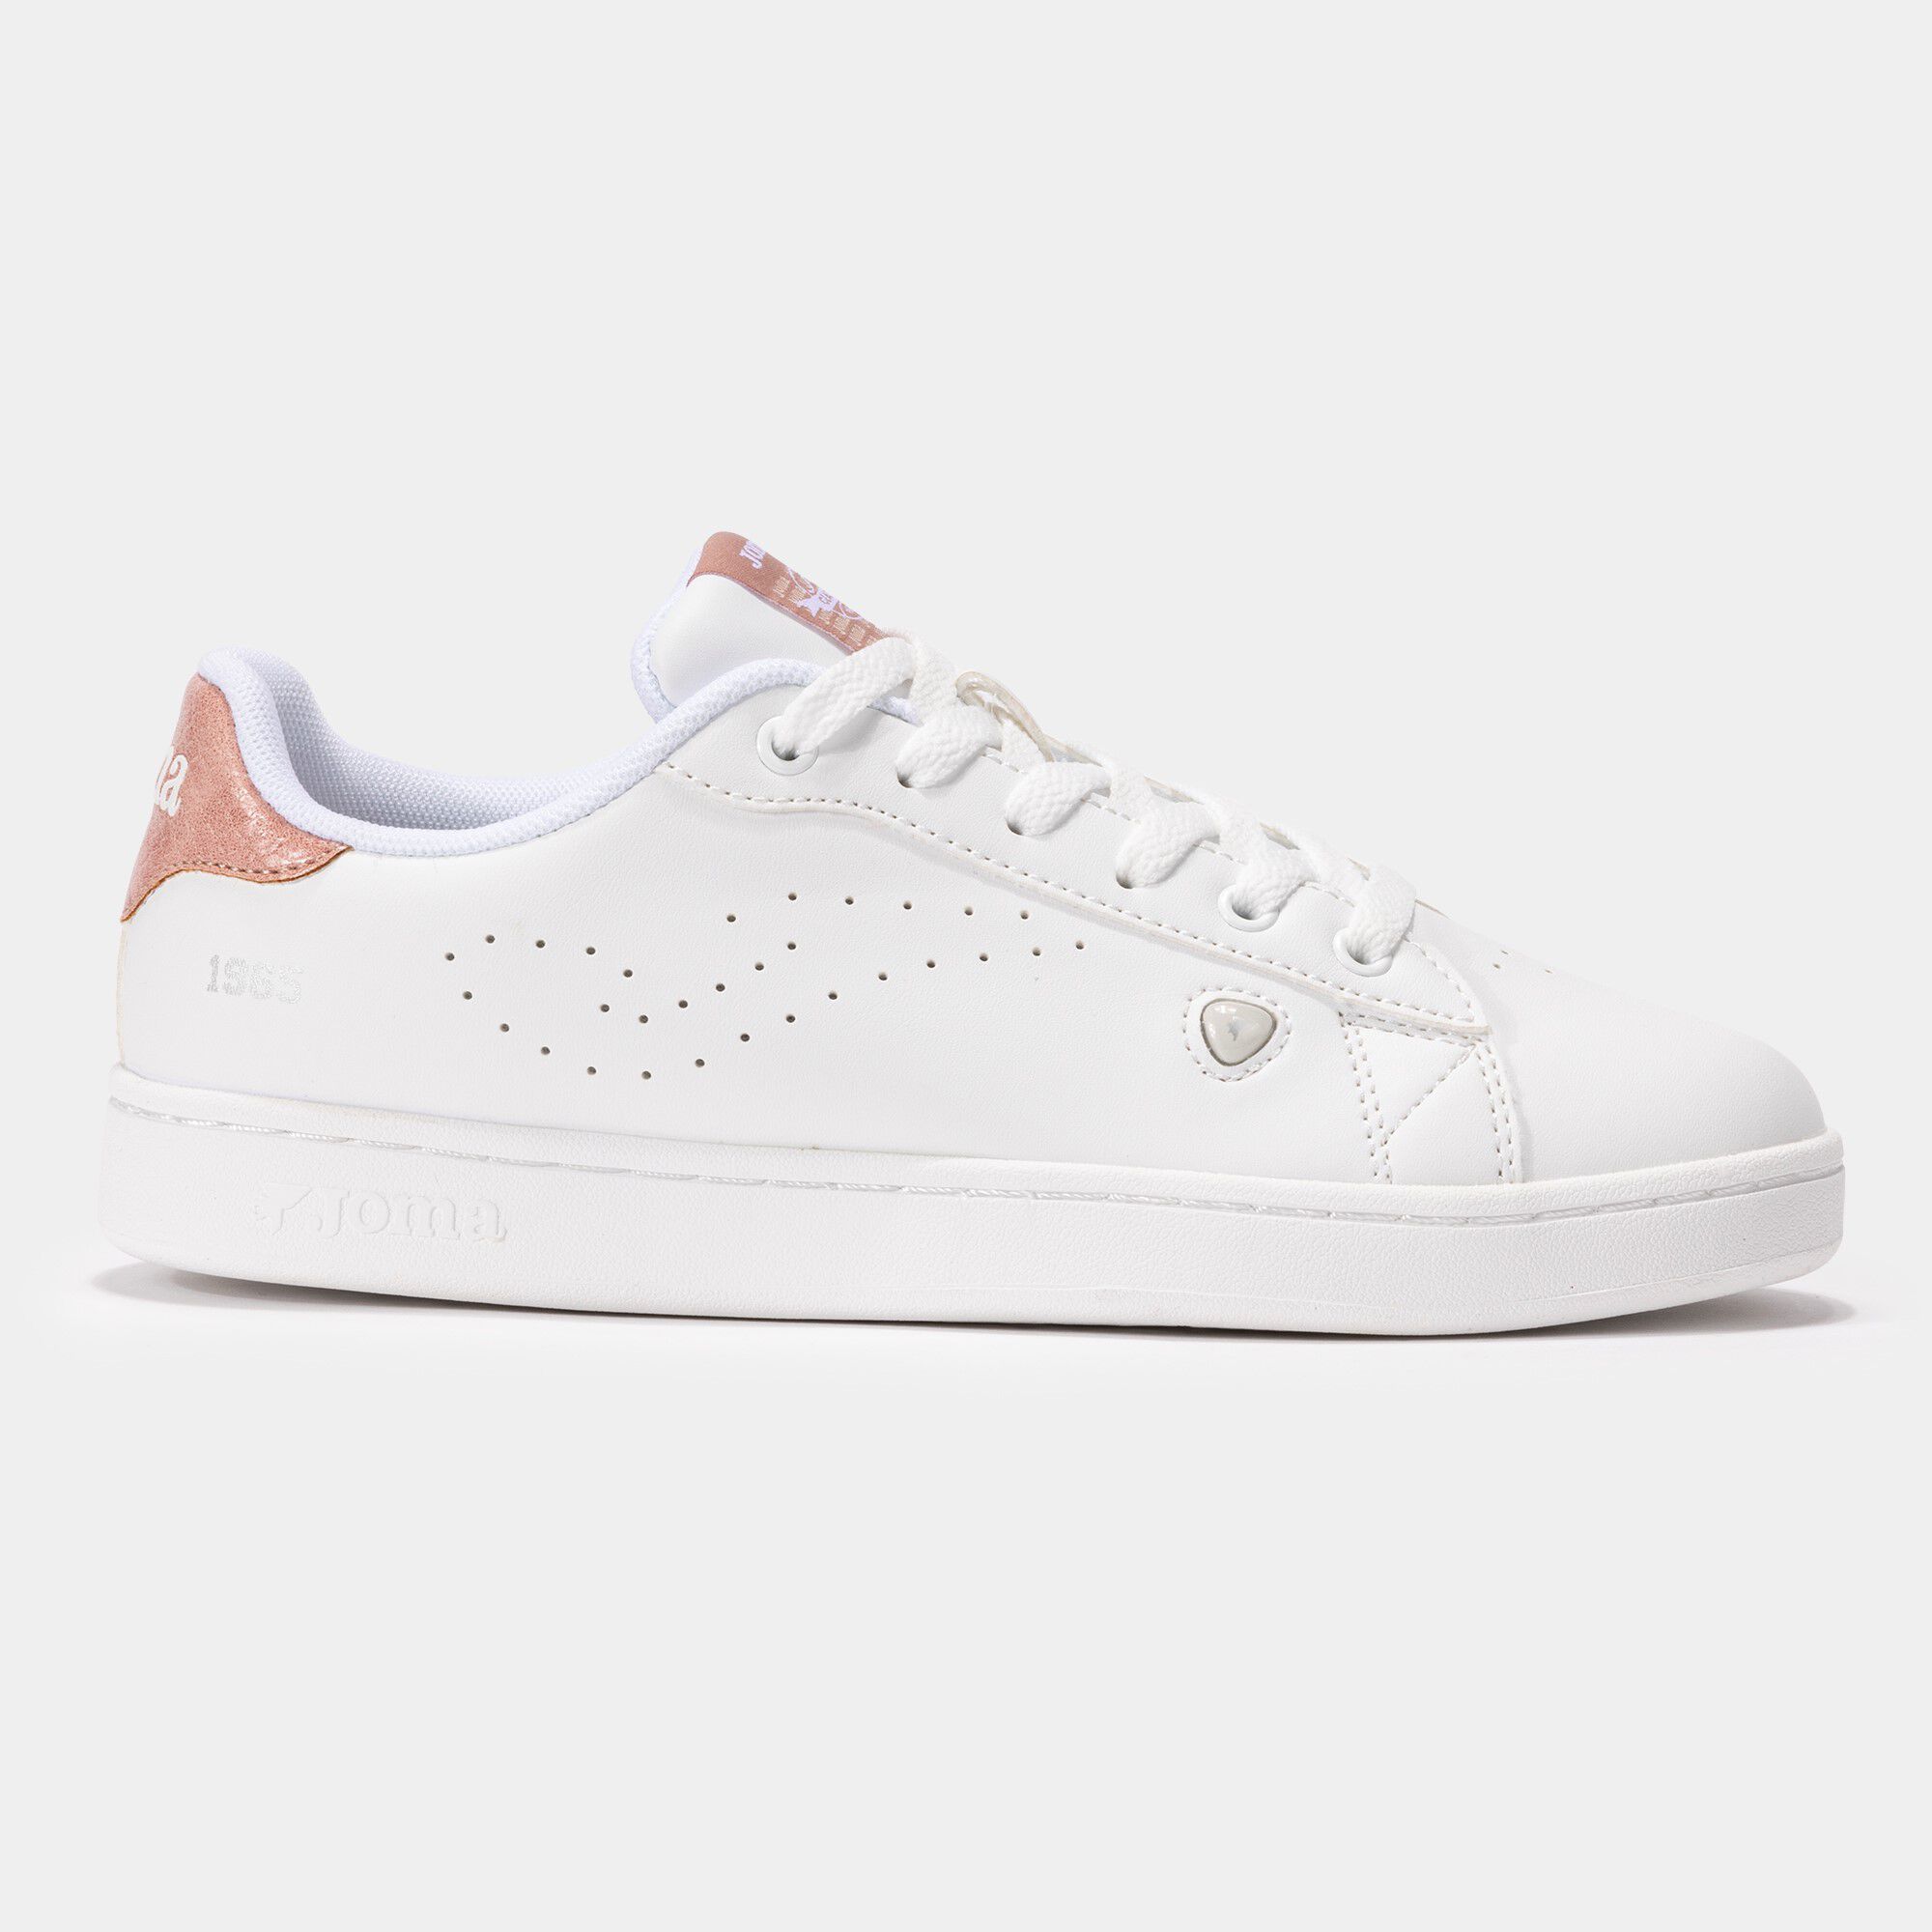 Sapatilhas casual Classic Lady 24 mulher branco rosa